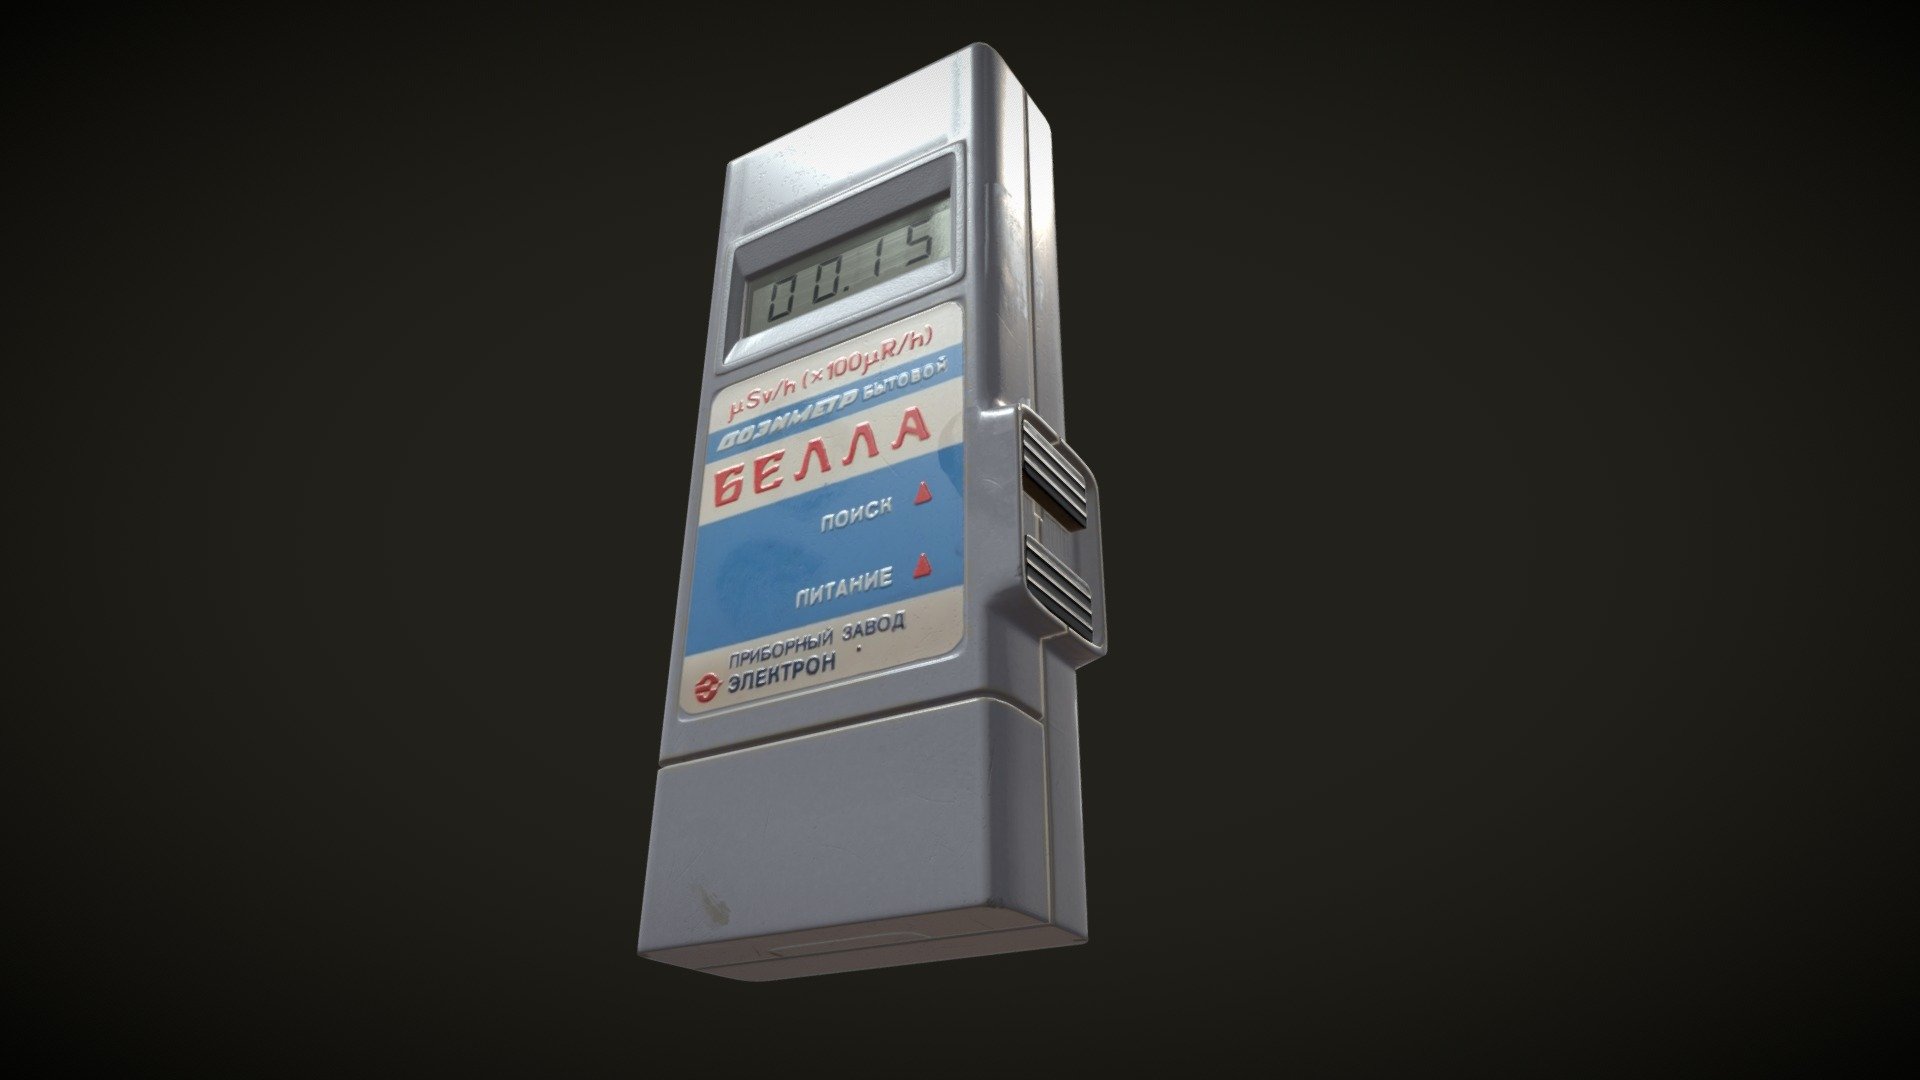 Present to you my new work. This is a late-soviet dosimeter named &ldquo;Bella